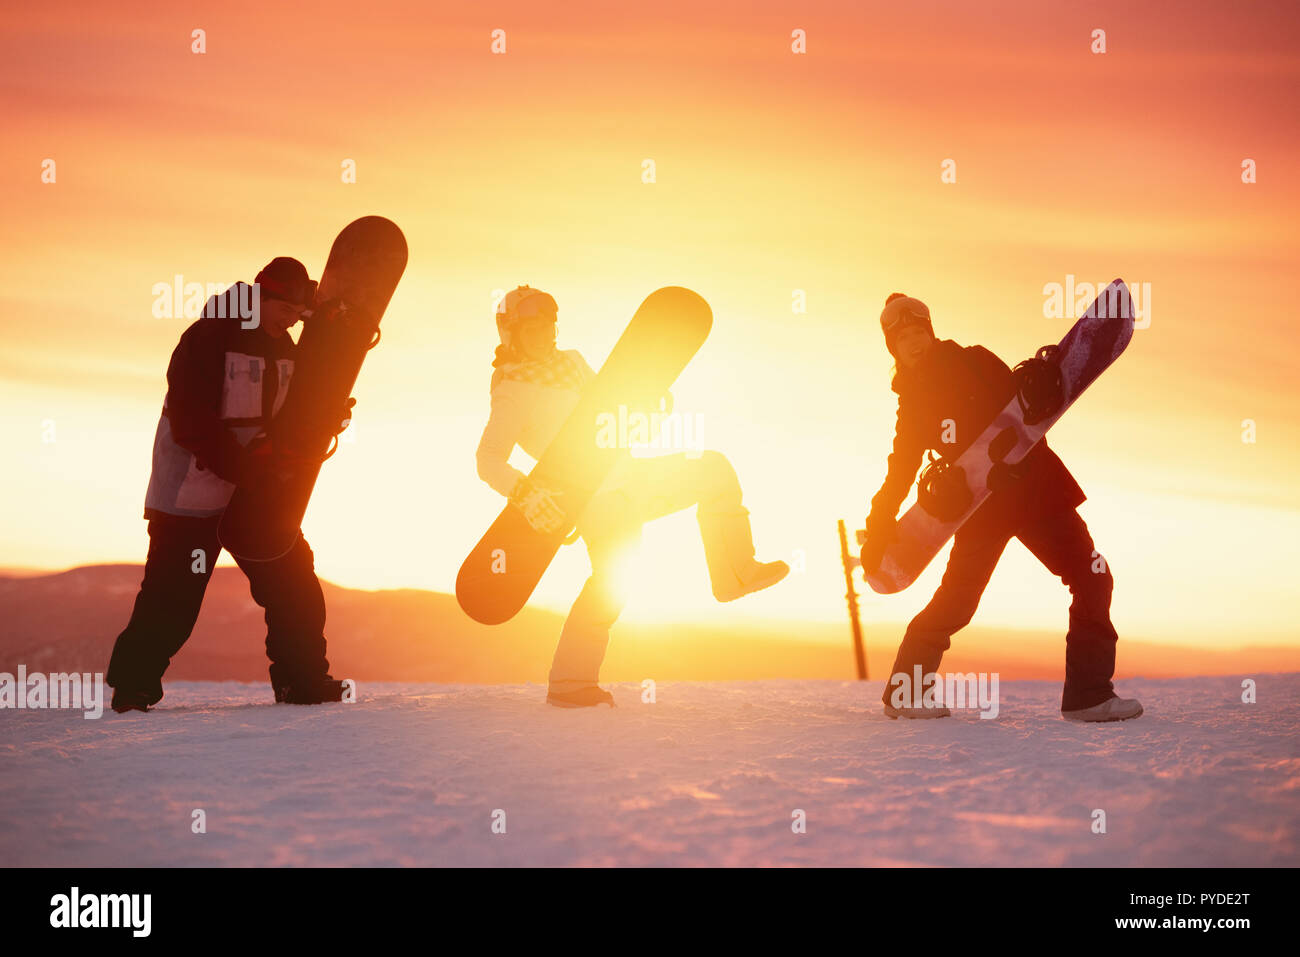 Three playful friends are having fun with snowboards. Funny silhouettes of snowboarders against sunset sky Stock Photo